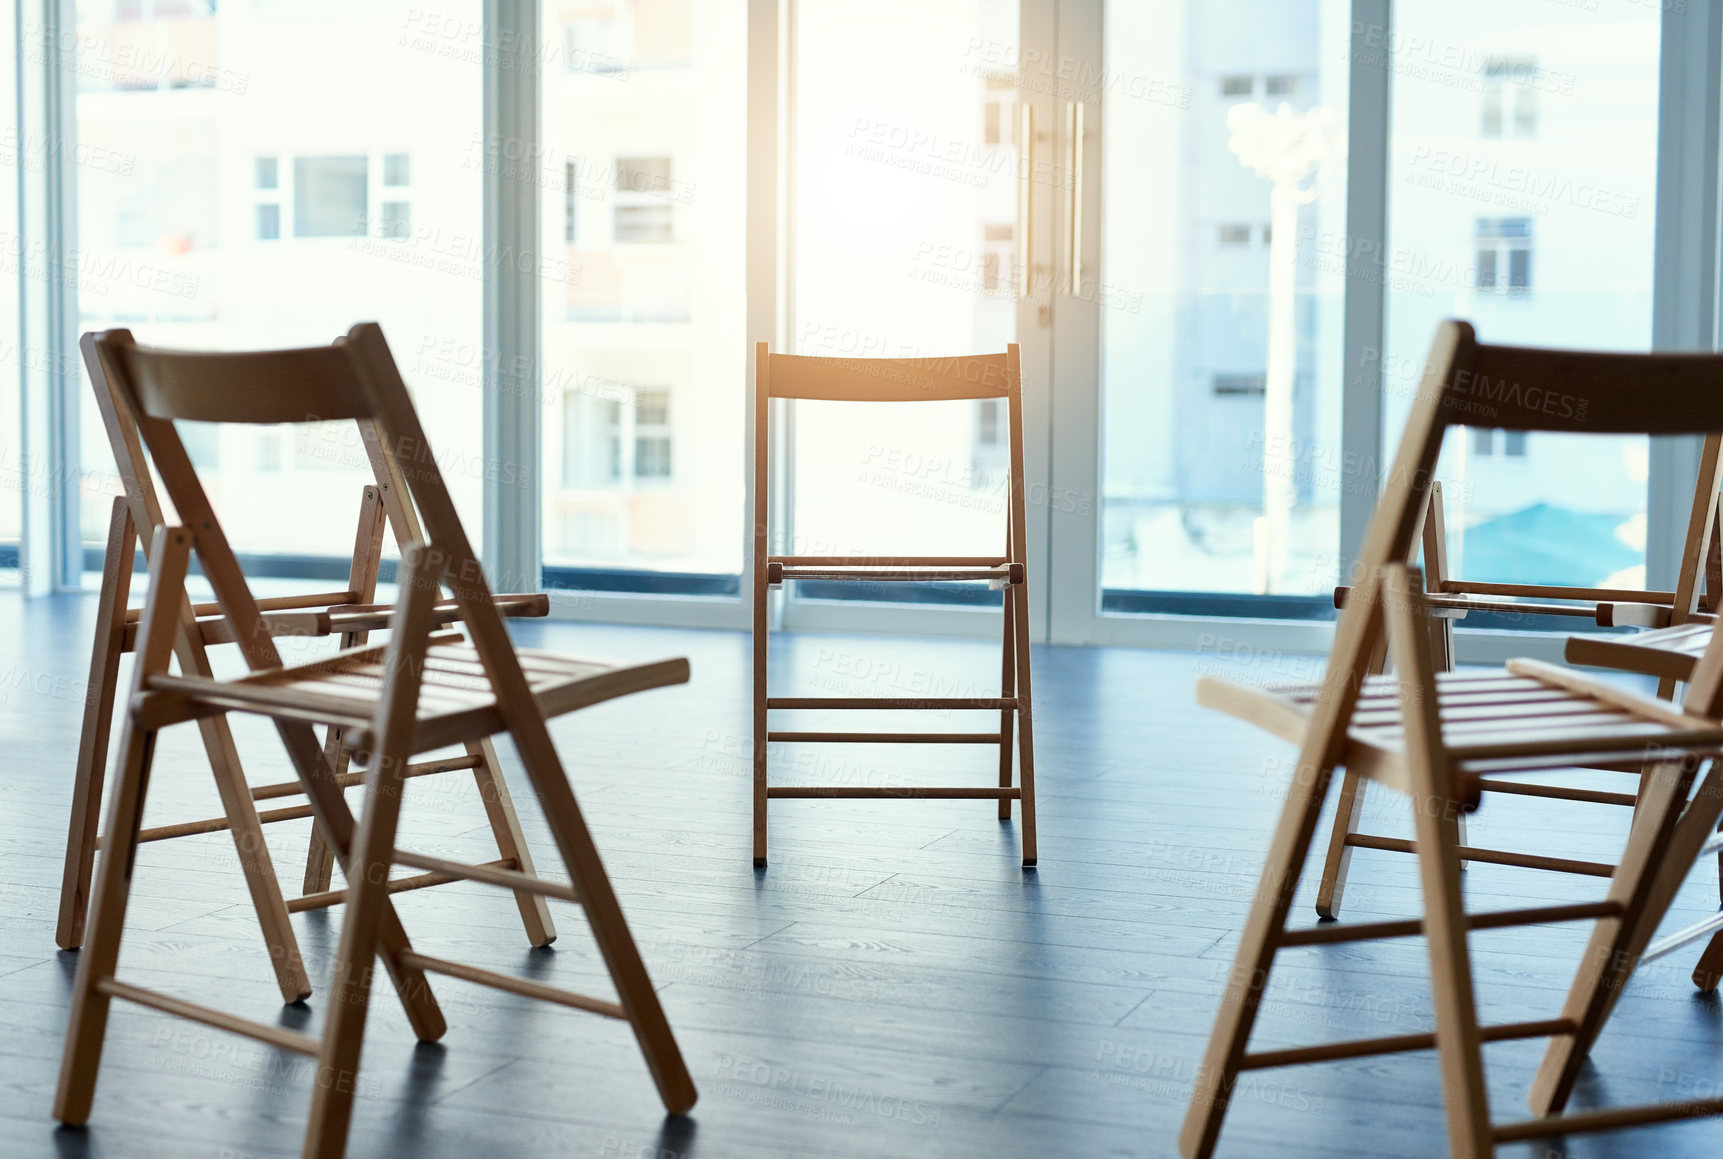 Buy stock photo Shot of chairs in an empty room with no people inside